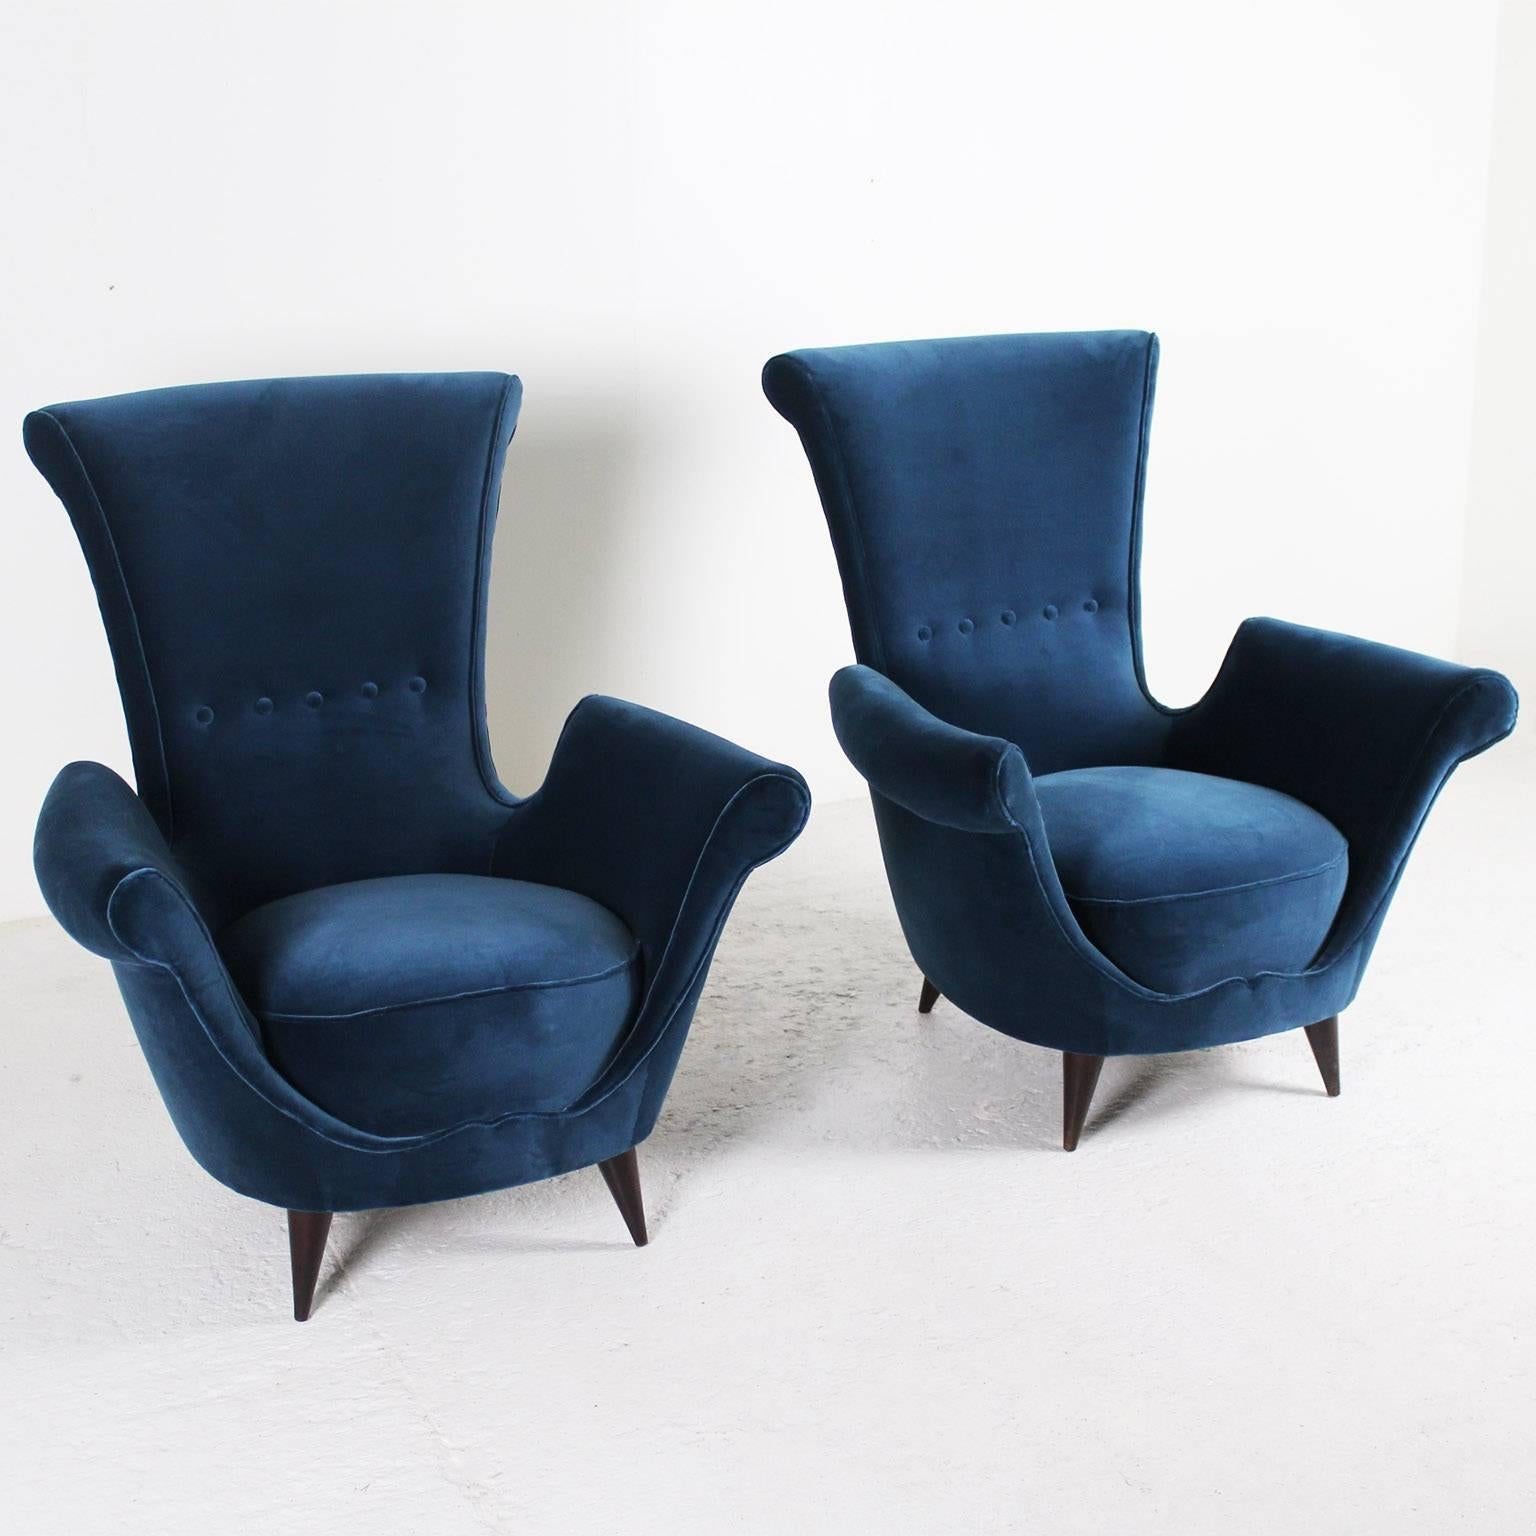 Set of Sofa and Armchairs in Blue Velvet, 1950 For Sale 2